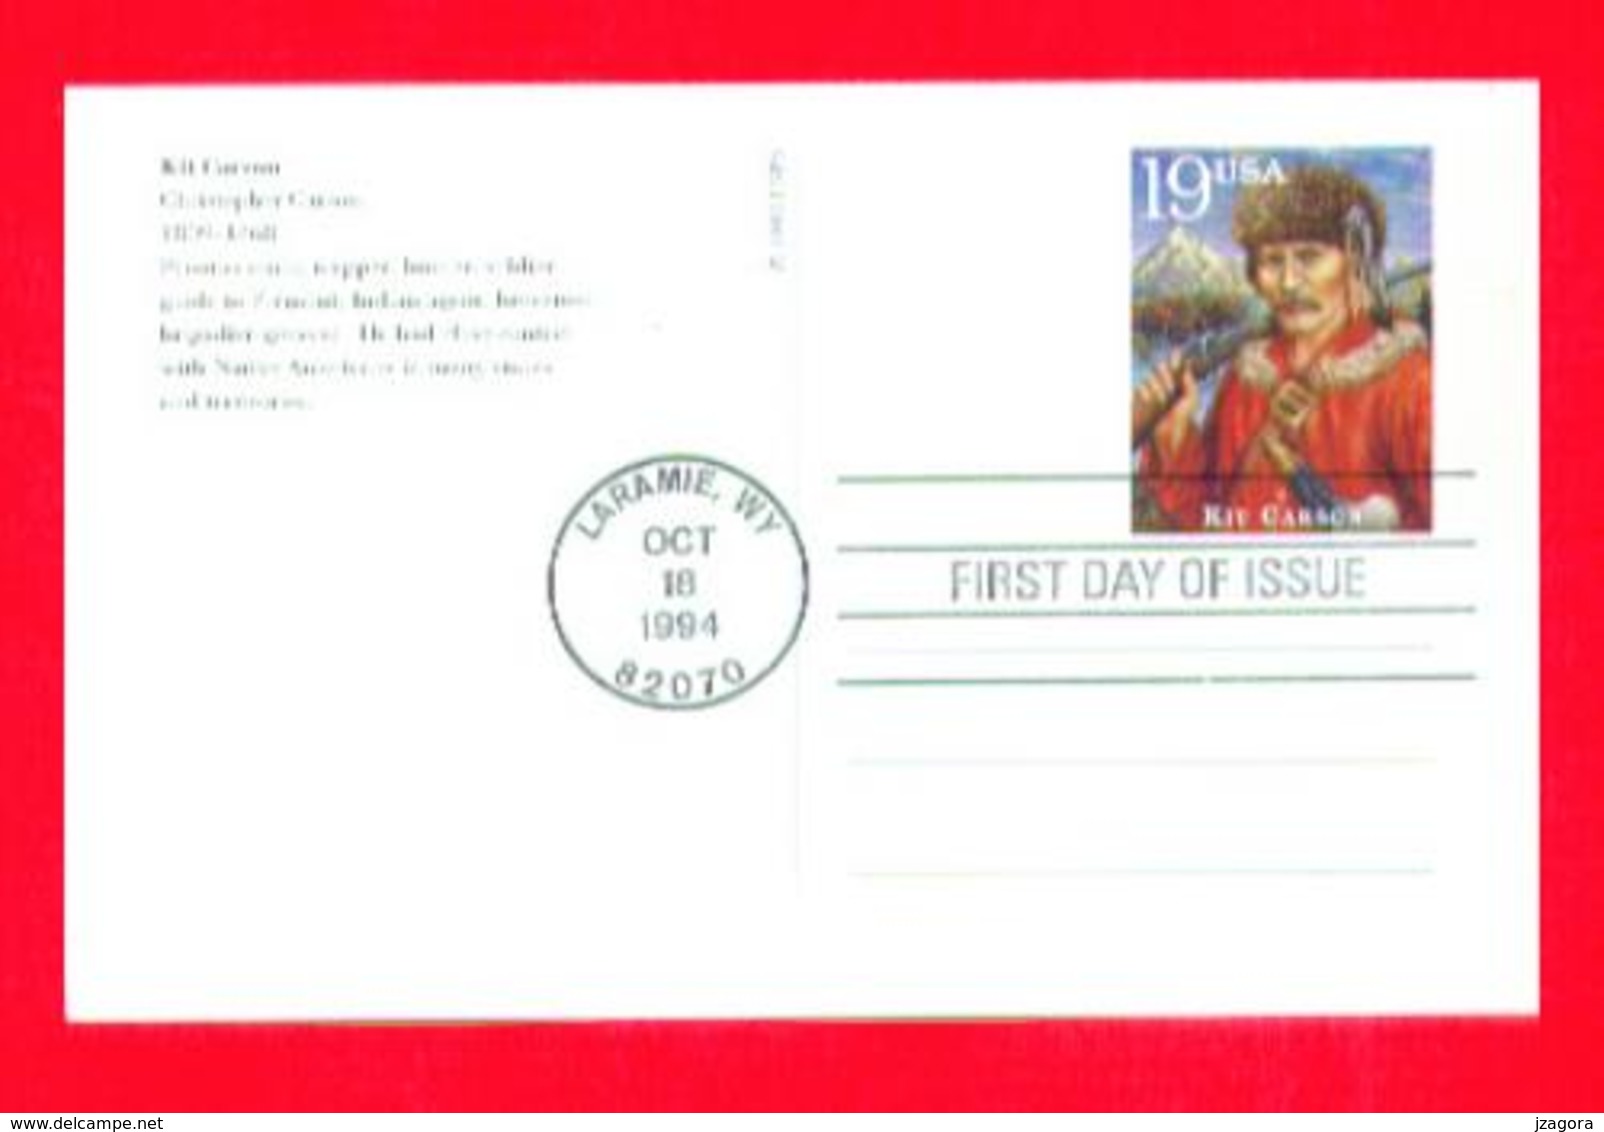 LEGENDS OF WILD WEST - KIT CARSON USA 1994 FDC UX 191 PRE-PAID POST CARD Law  Prepaid - Indios Americanas